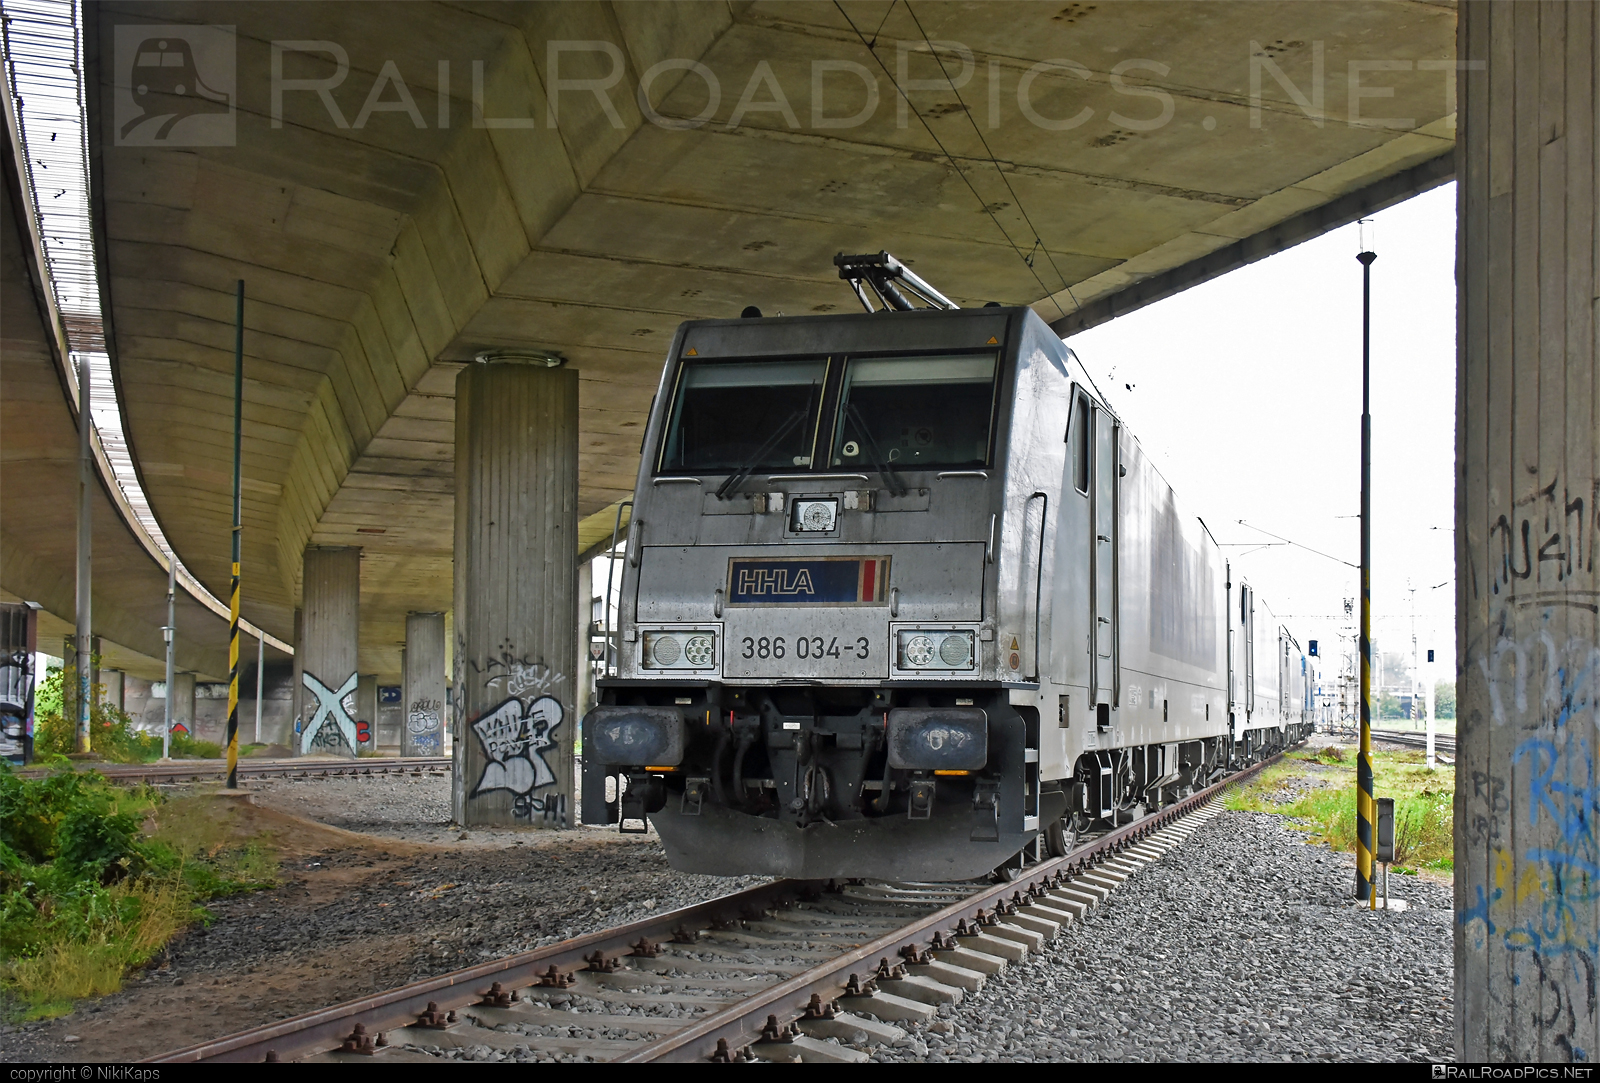 Bombardier TRAXX F140 MS - 386 034-3 operated by METRANS Rail s.r.o. #bombardier #bombardiertraxx #hhla #metrans #metransrail #traxx #traxxf140 #traxxf140ms